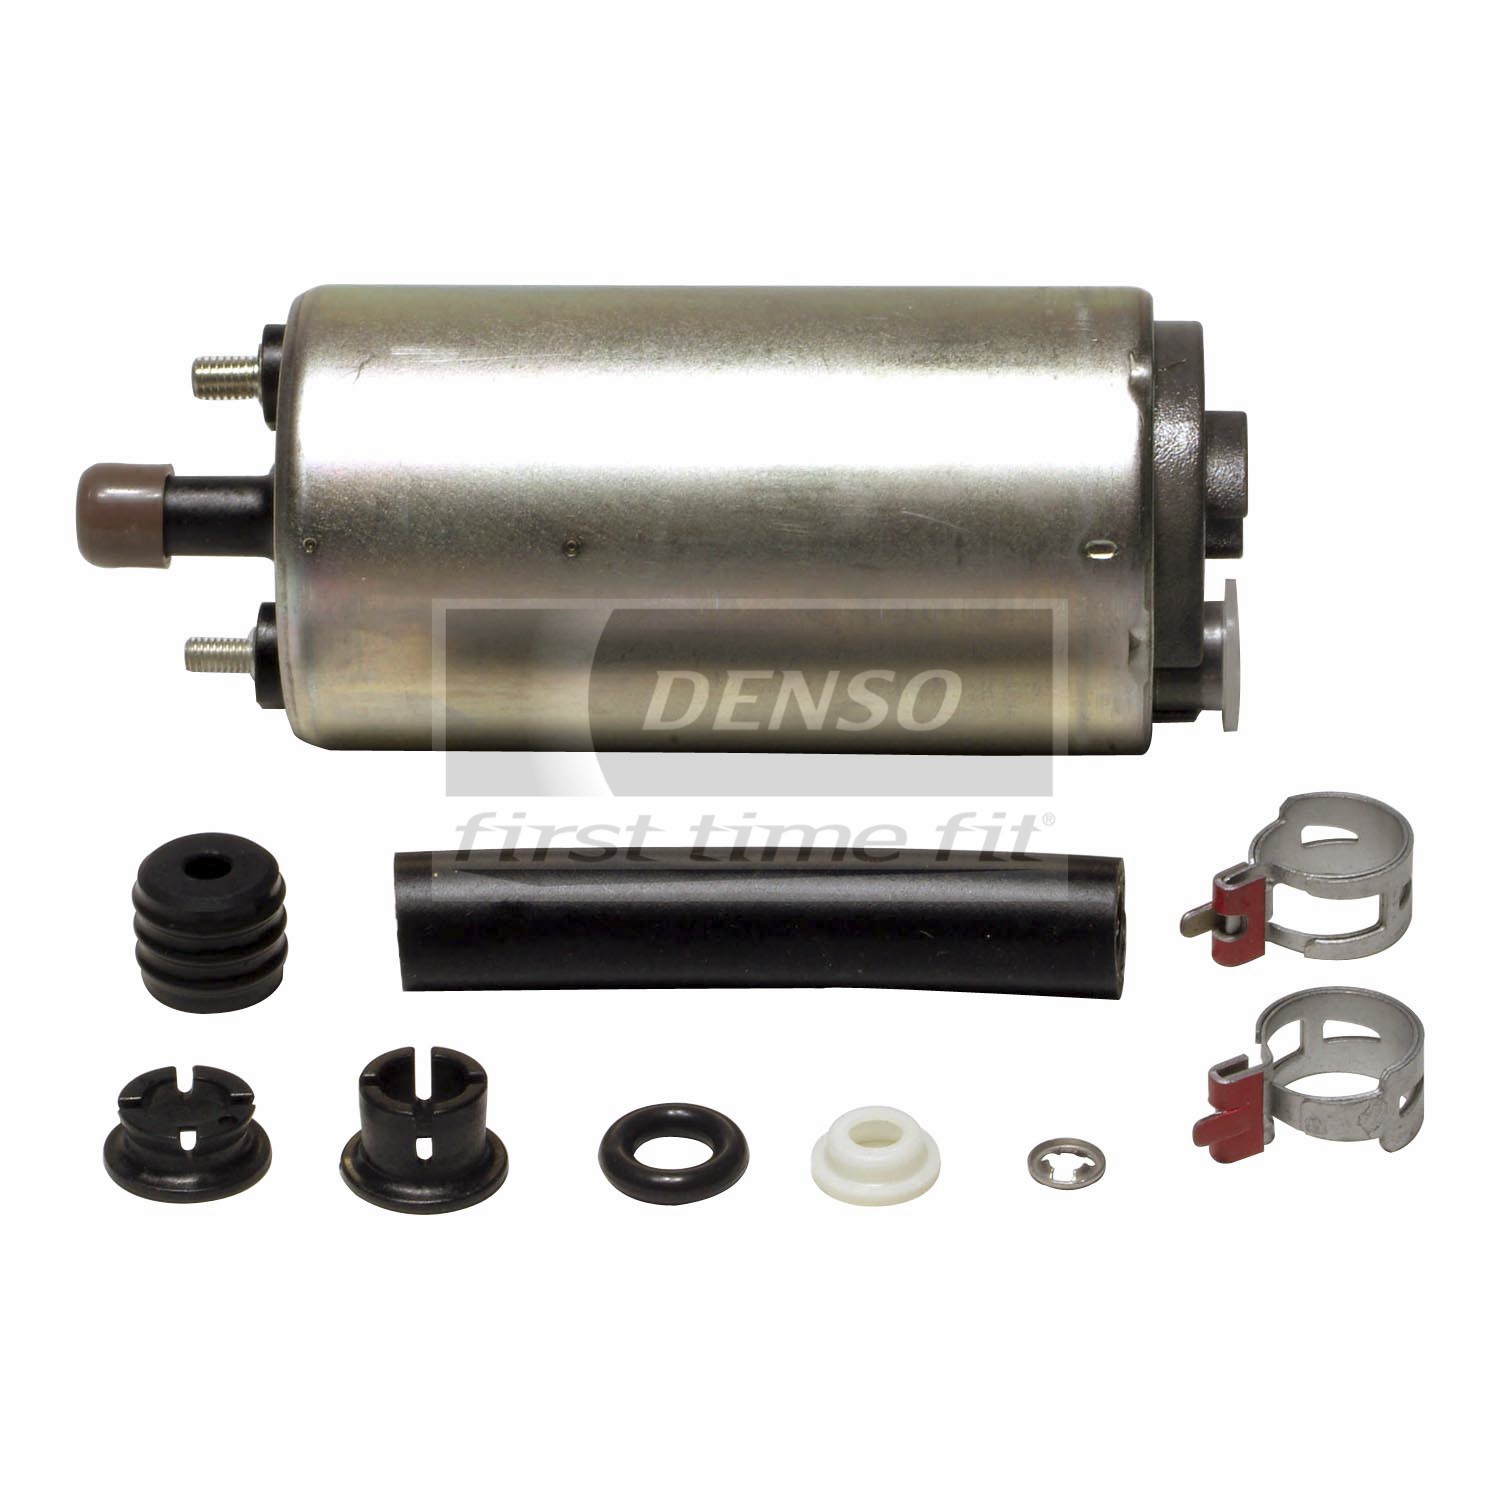 Image of ID 9510012 Denso 9510012 Electric Fuel Pump Fits 1983-1991 Toyota Camry